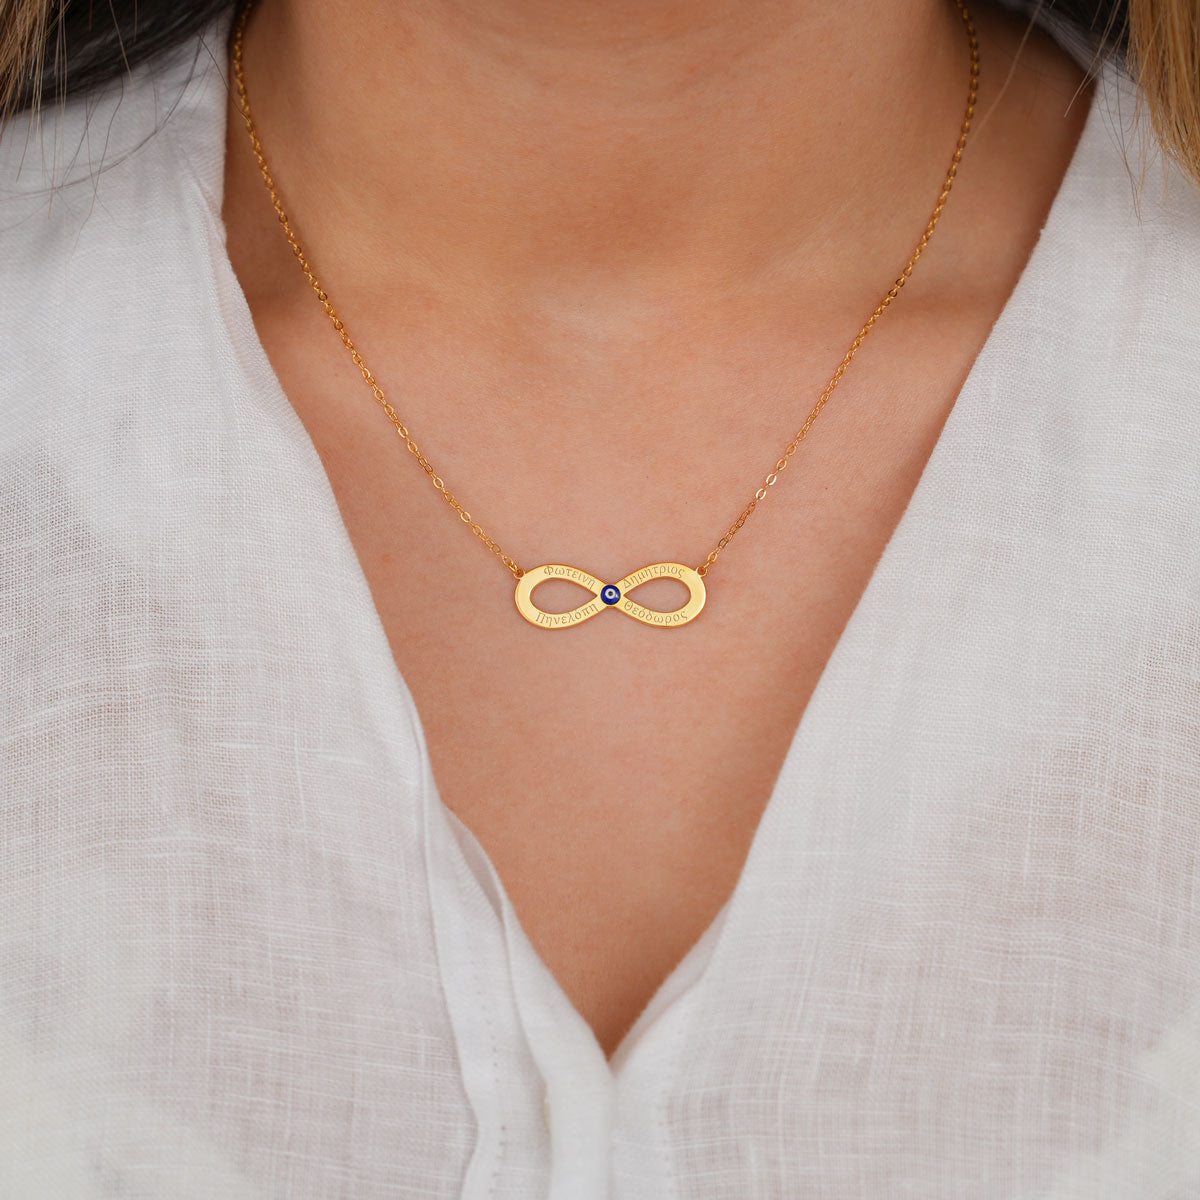 2 Greek Name Engraved Infinity Necklace With Evil Eye